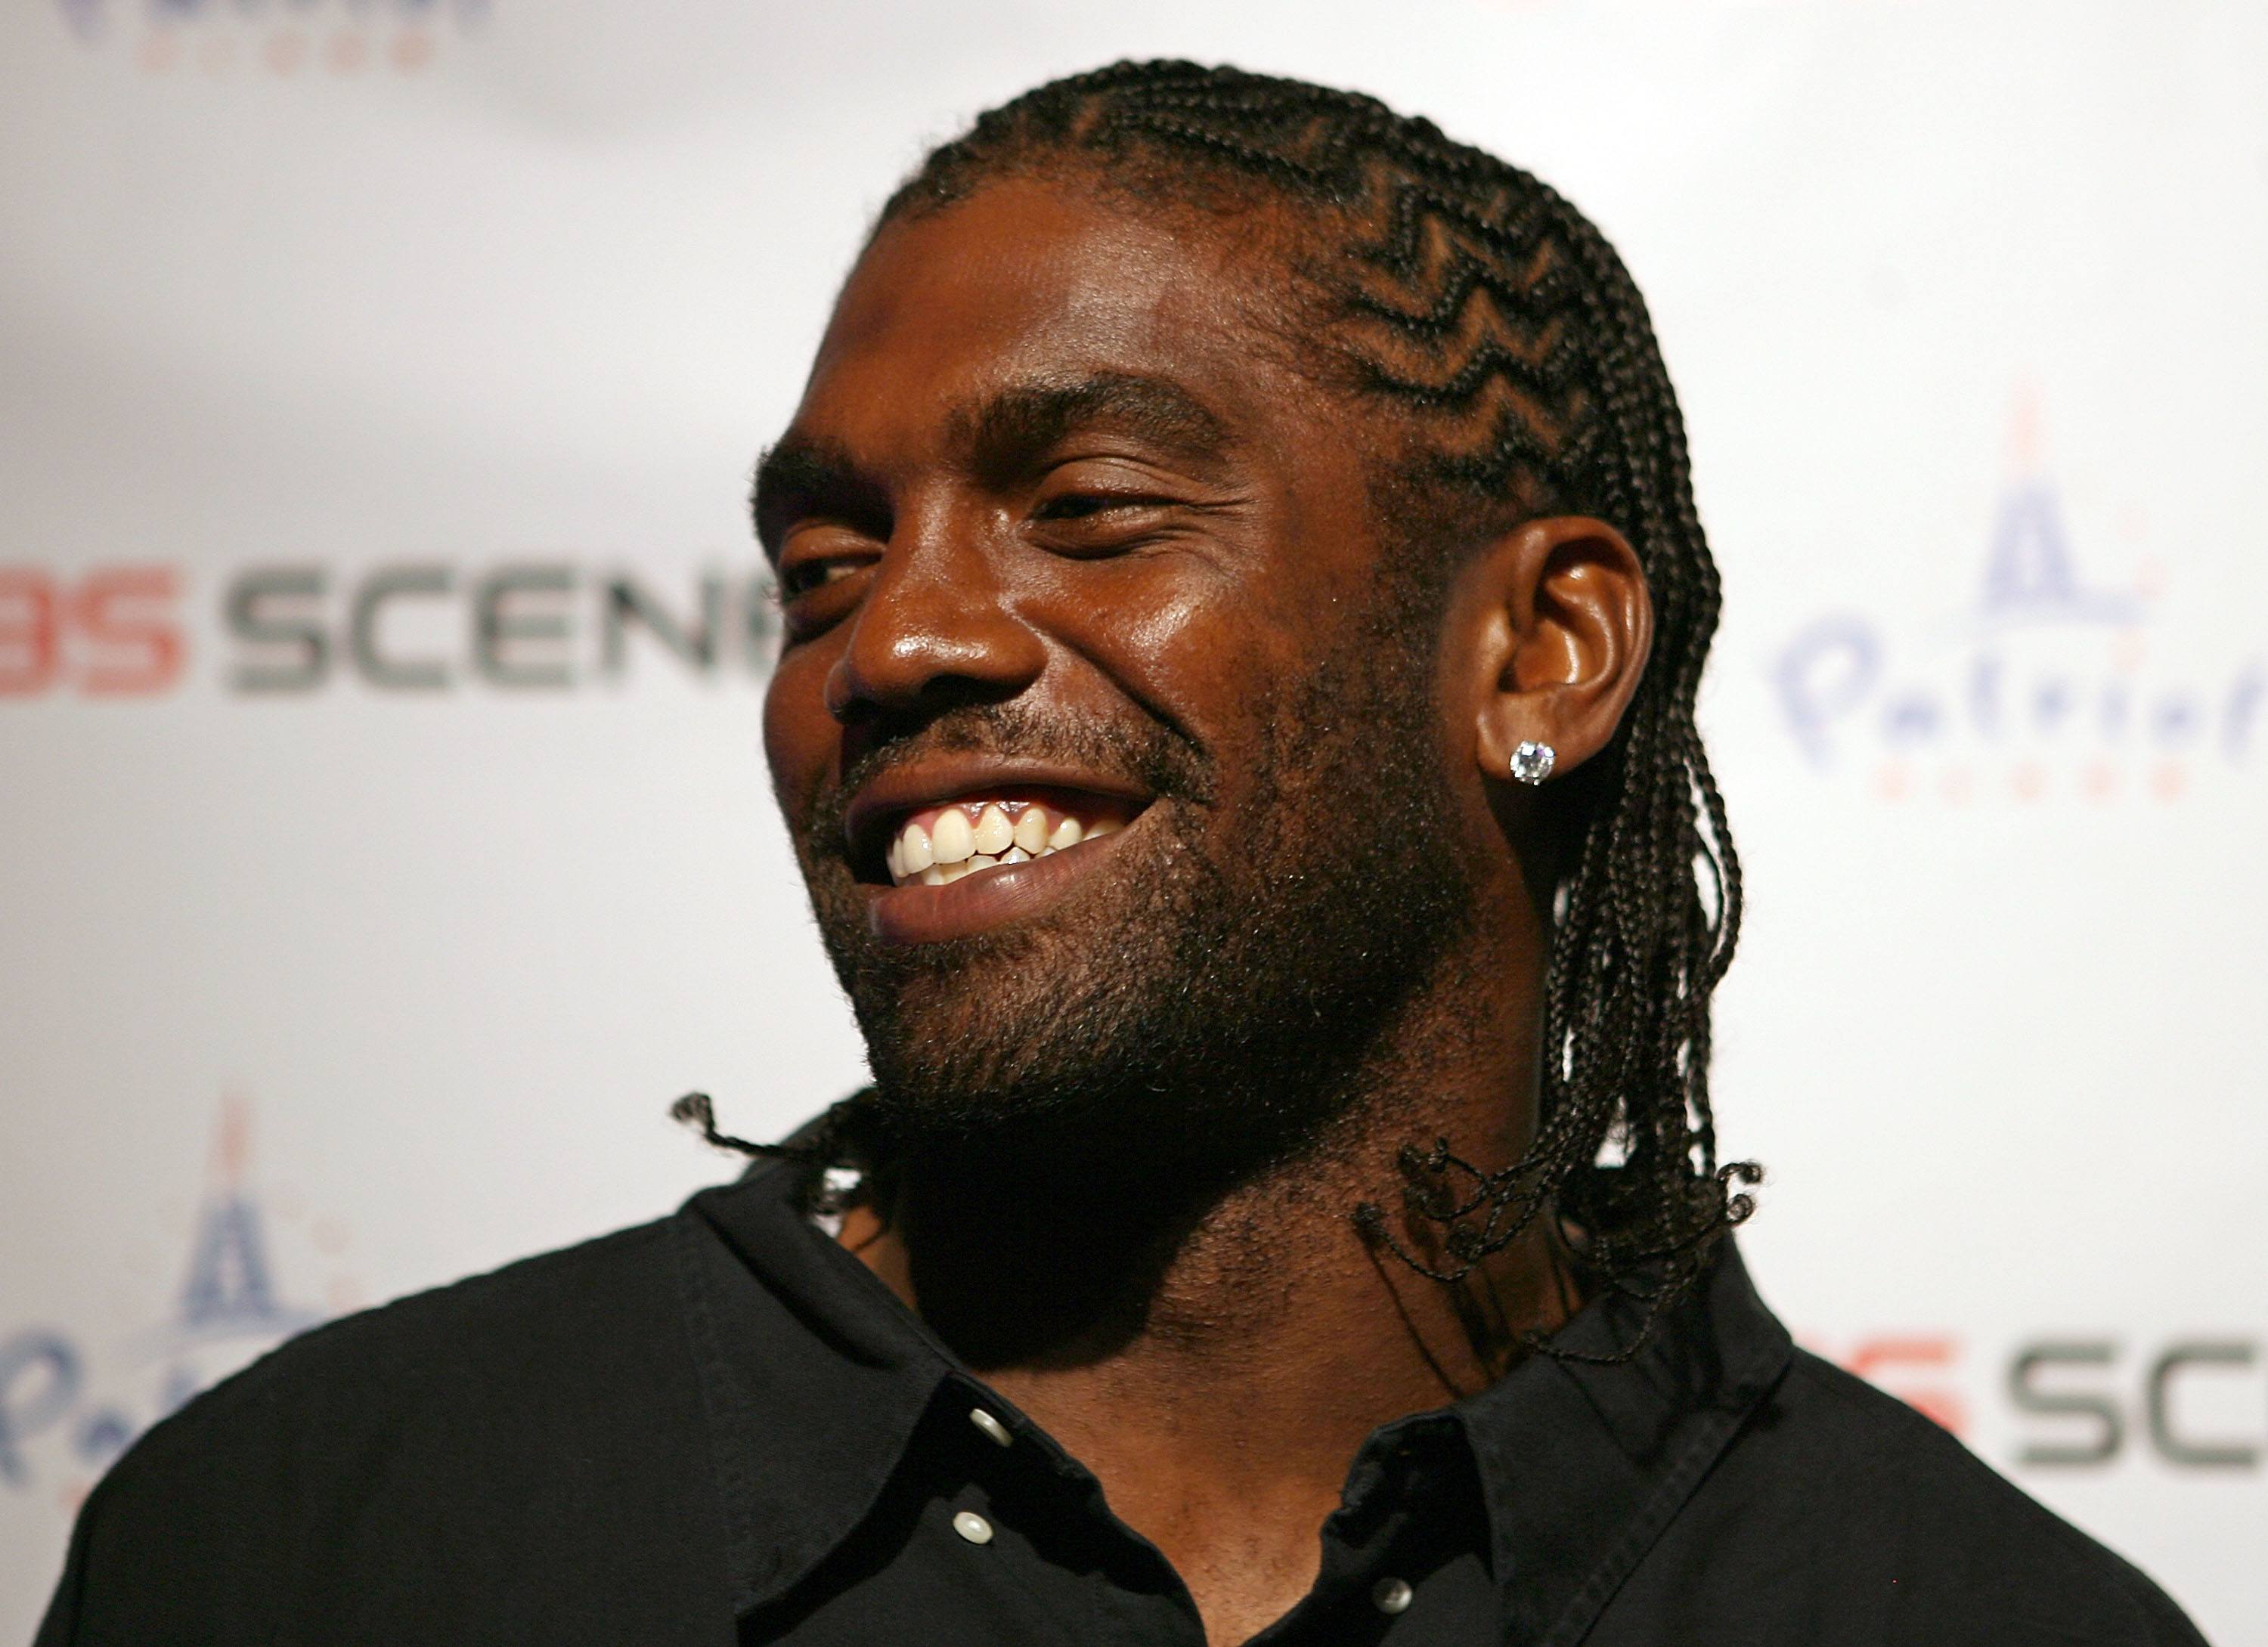 Randy Moss smiles during a media conference.